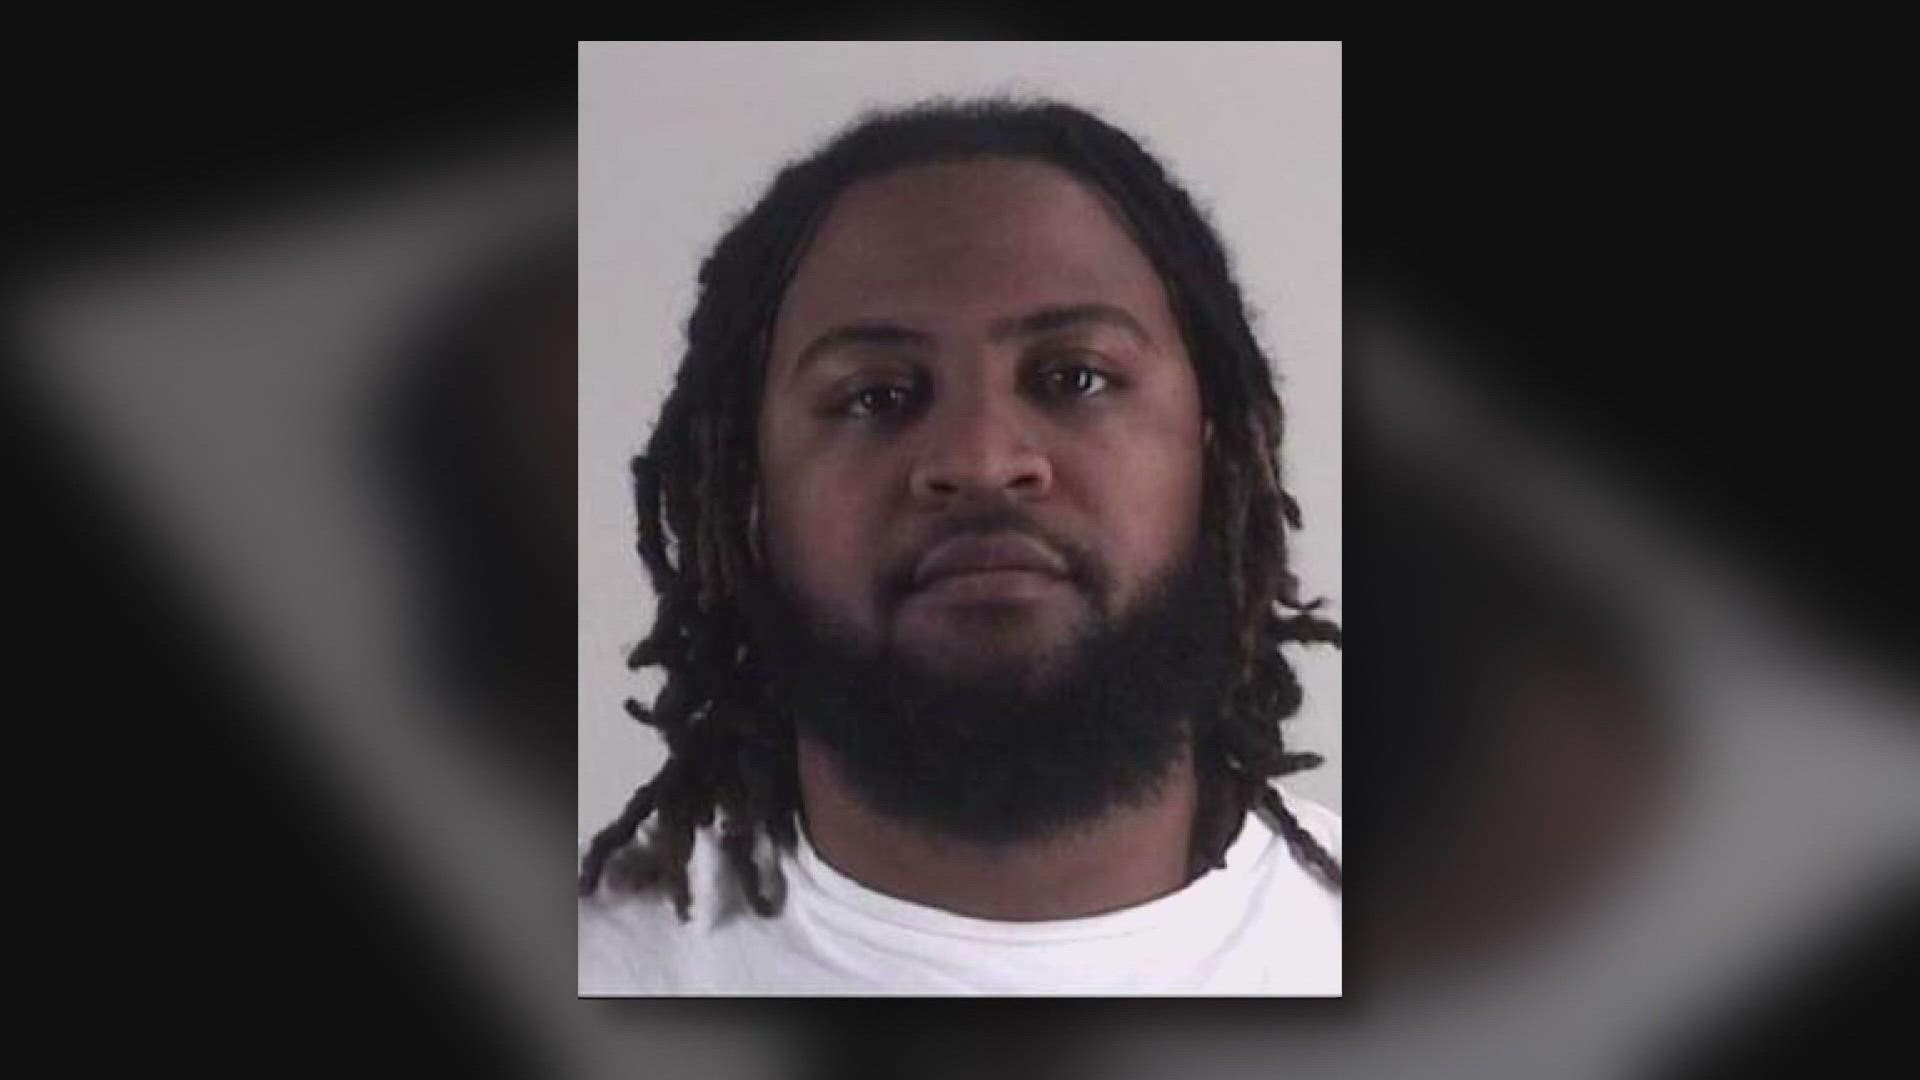 Police confirmed to WFAA on Thursday they had arrested 28-year-old Markynn Dmorous West in connection to the shooting death of 43-year-old Chin Il Shin.